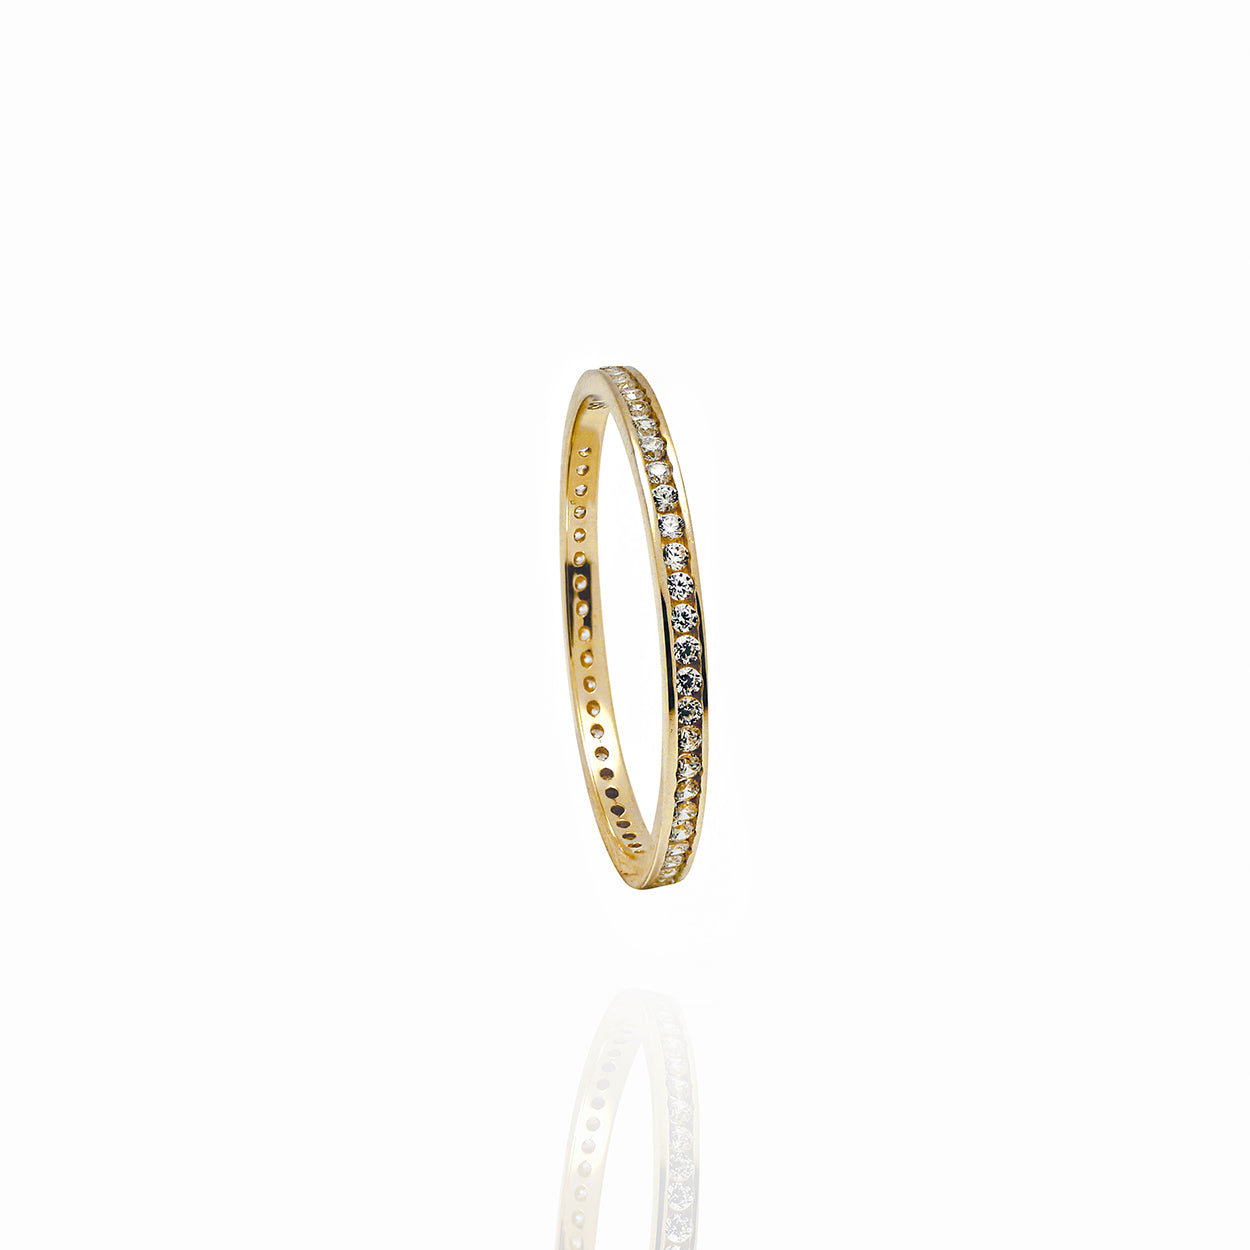 10kt Yellow Gold Eternity Style Band set with Cubic Zirconia and 2mm Wide 1